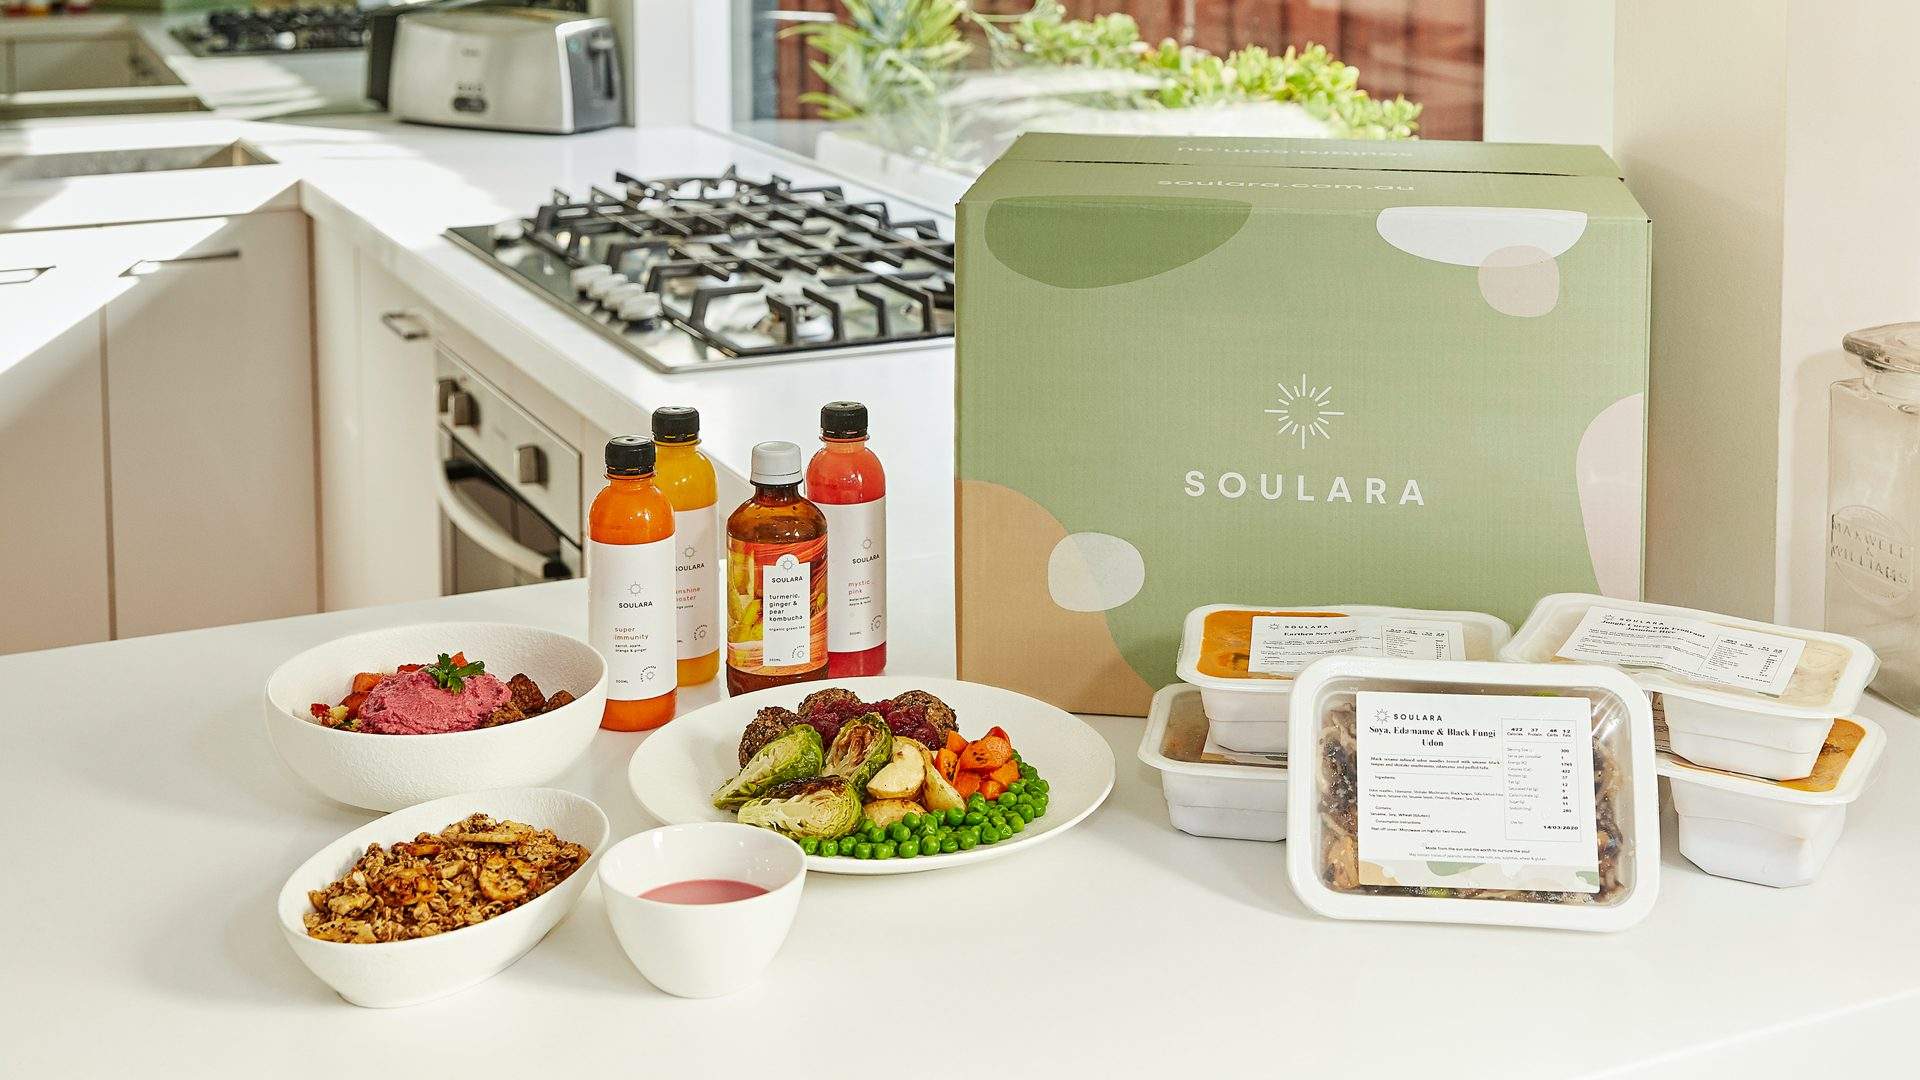 soulara is one of the best meal kit services available